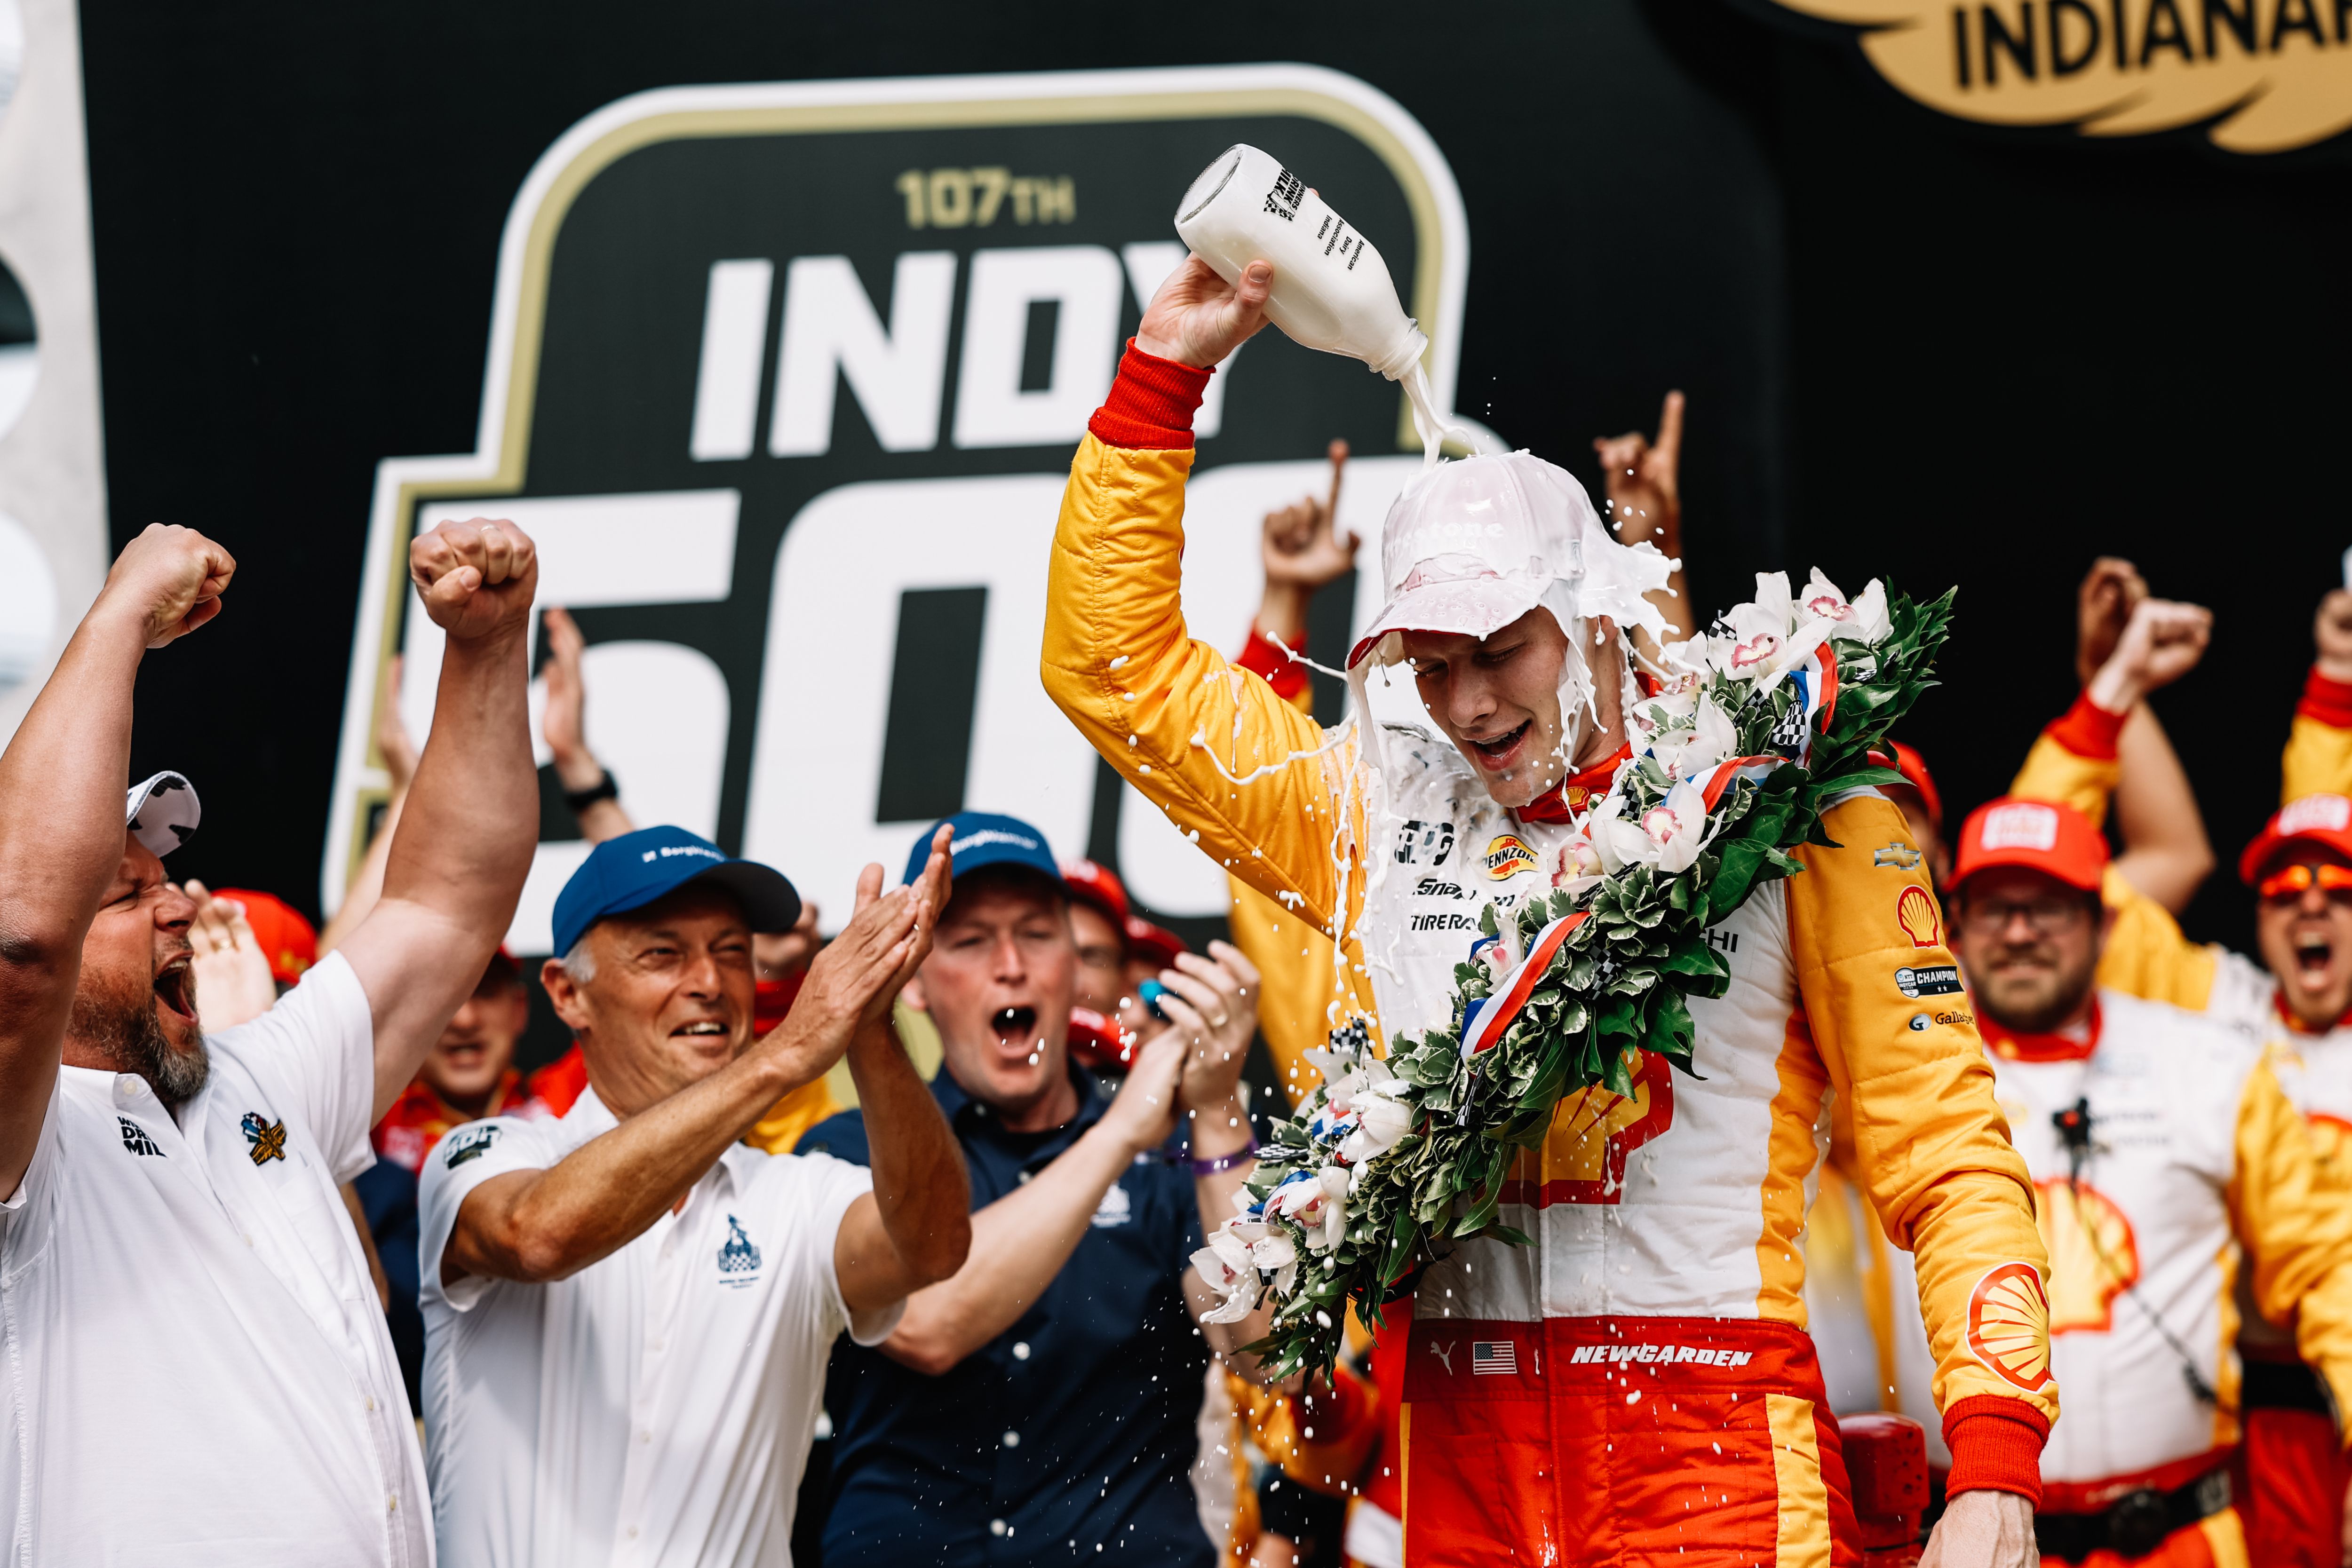 Josef Newgarden — winner of the 107th Running of Indianapolis 500 — smiling and pouring milk over his own head.